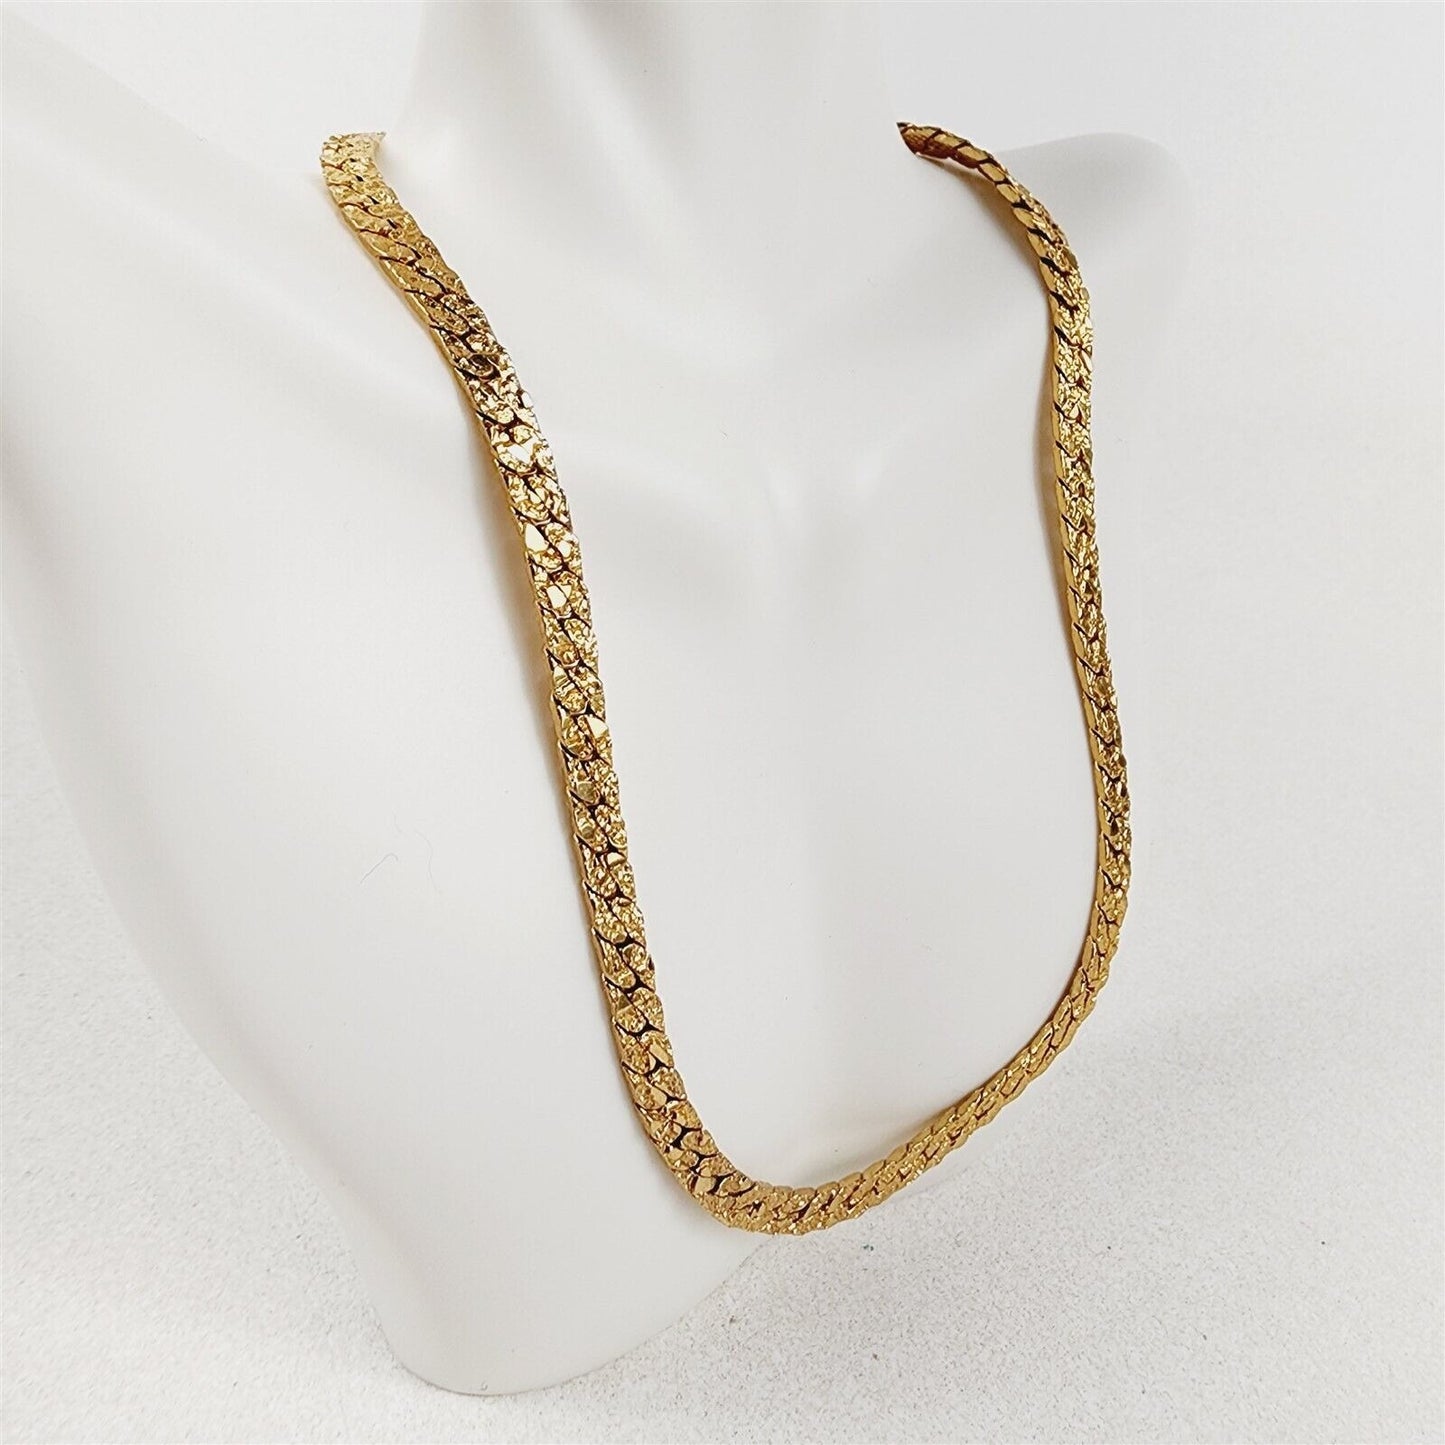 14K Gold Plated Necklace Italian Nugget Chain - 17"